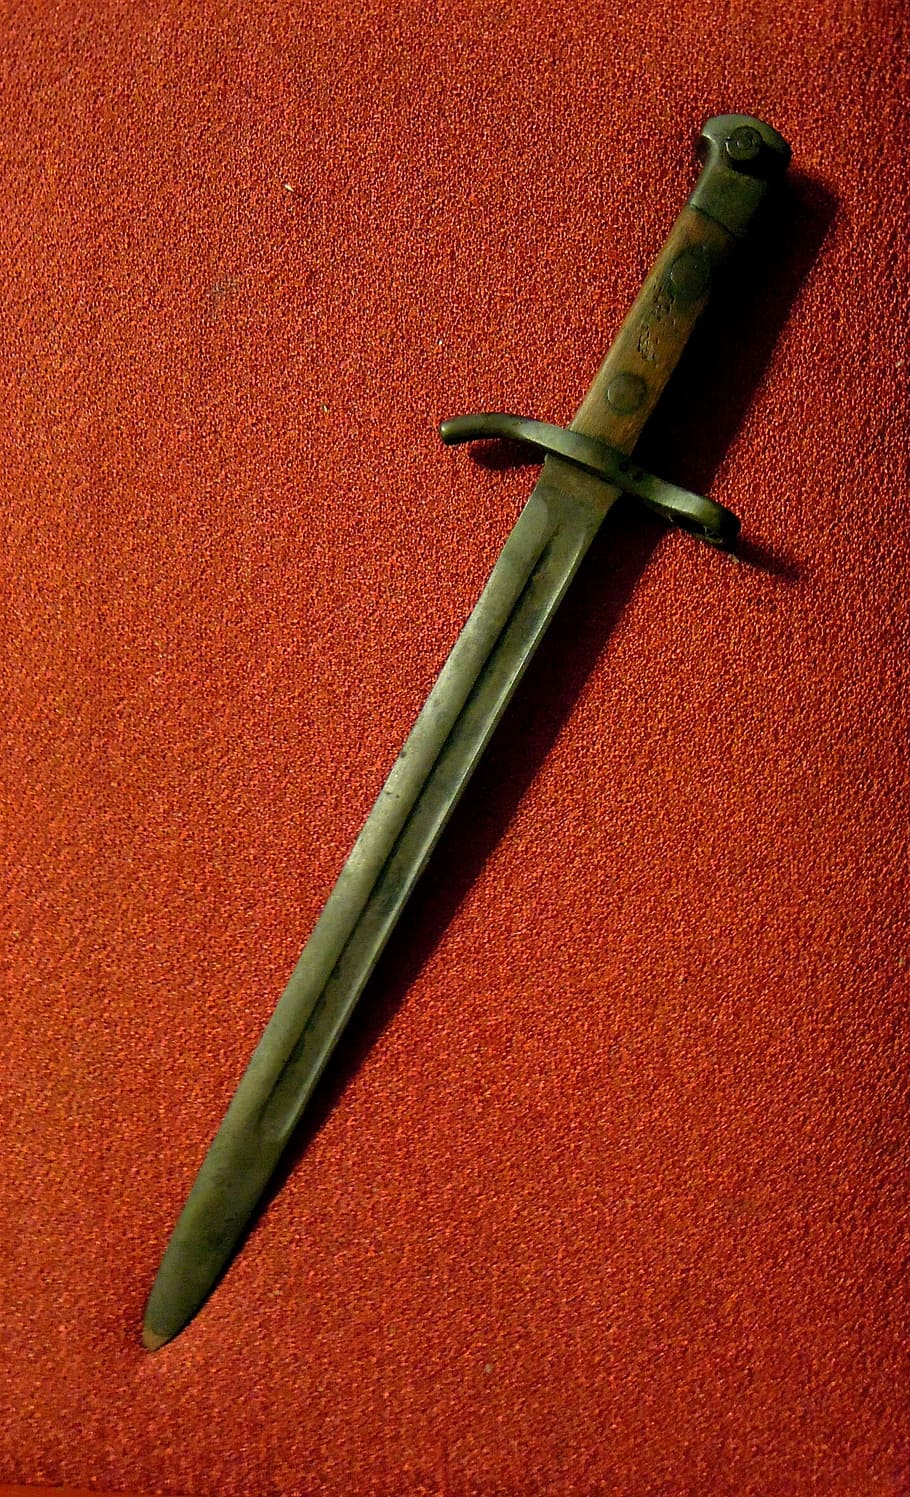 Bayonet, Rifle, part of the rifle, the weapon, old, hackman